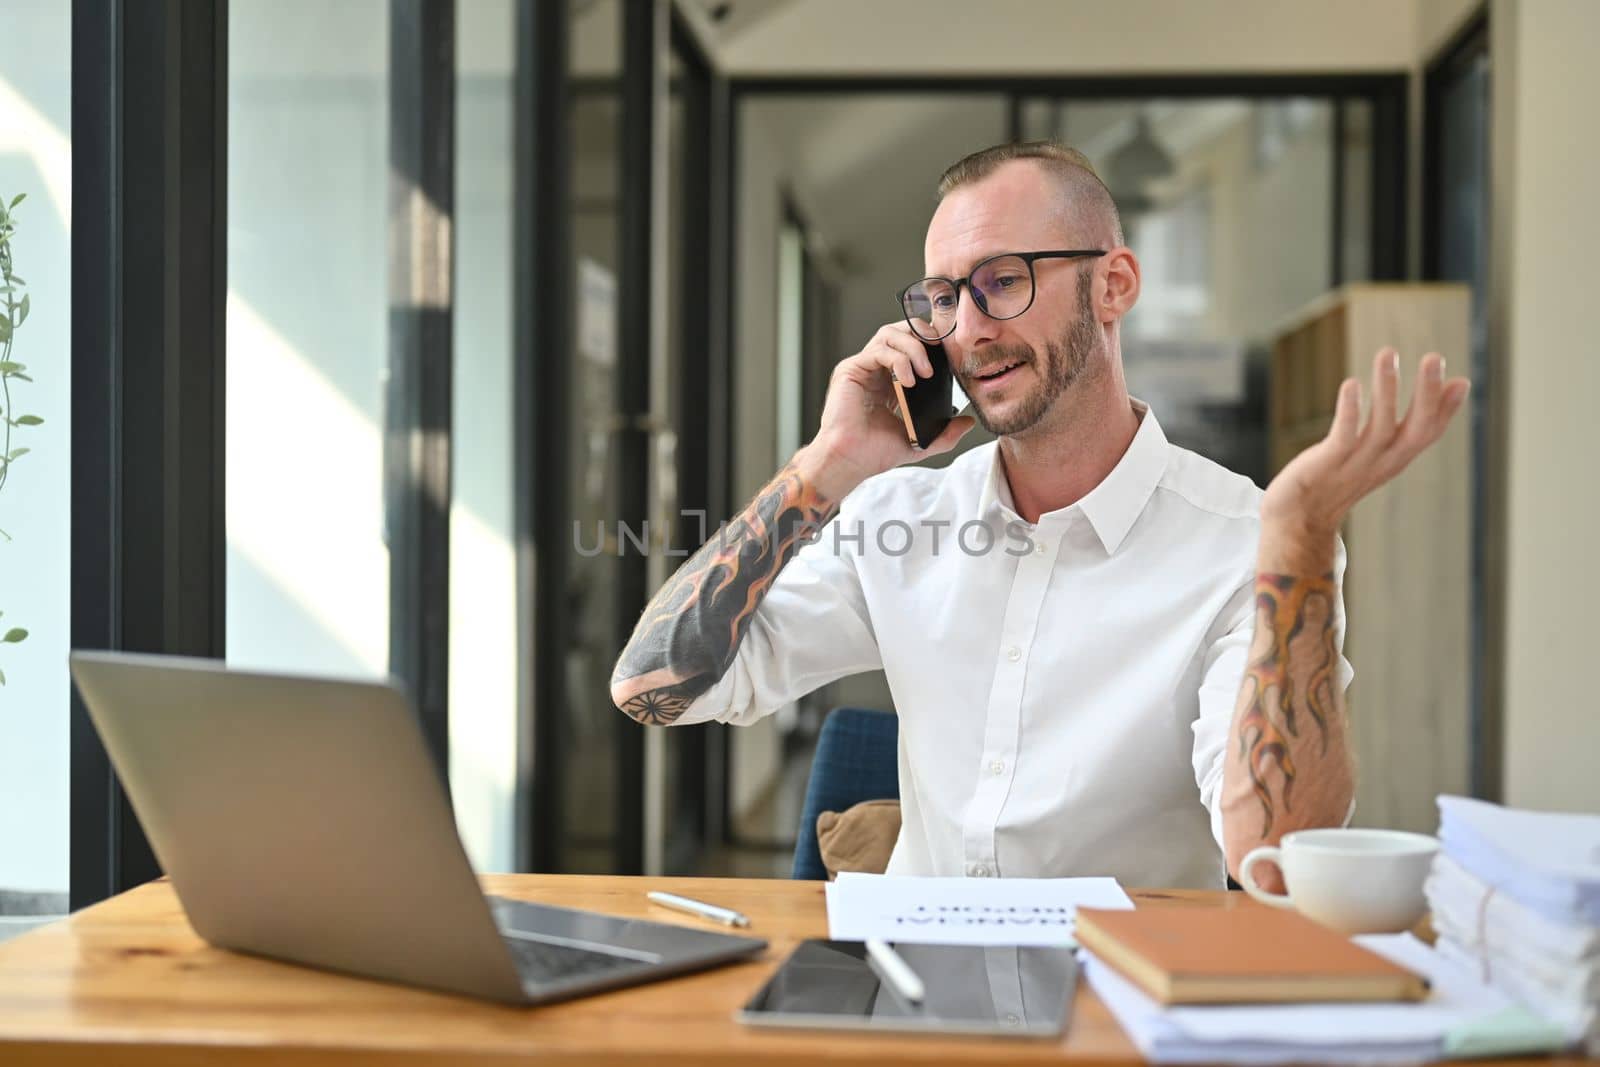 Friendly caucasian male manager wearing glasses talking on phone, sitting at desk with laptop.